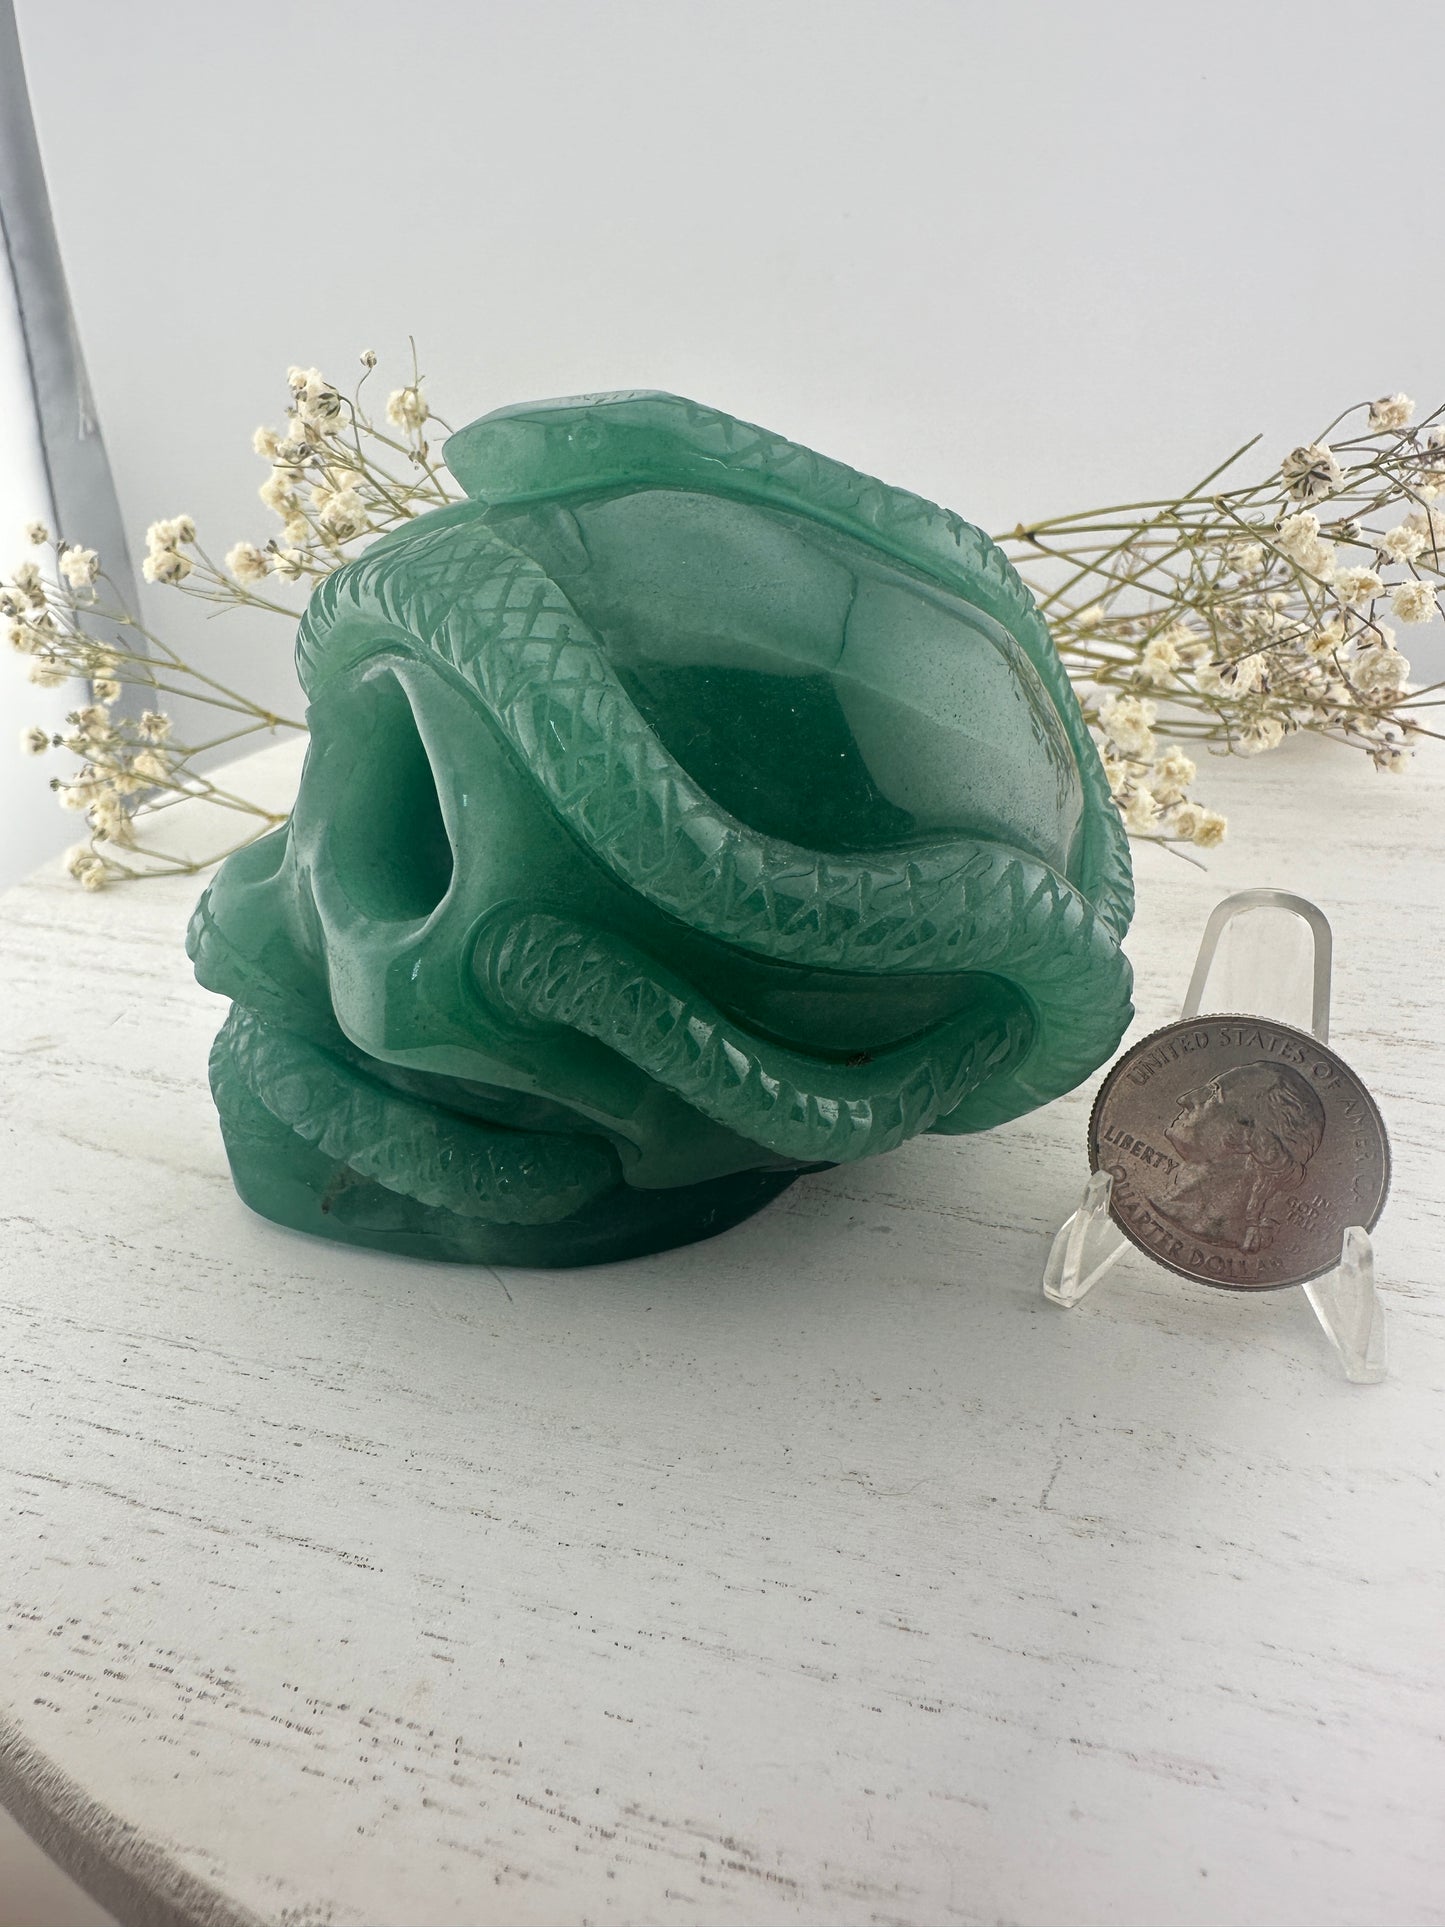 Green aventurine skull with snakes carving